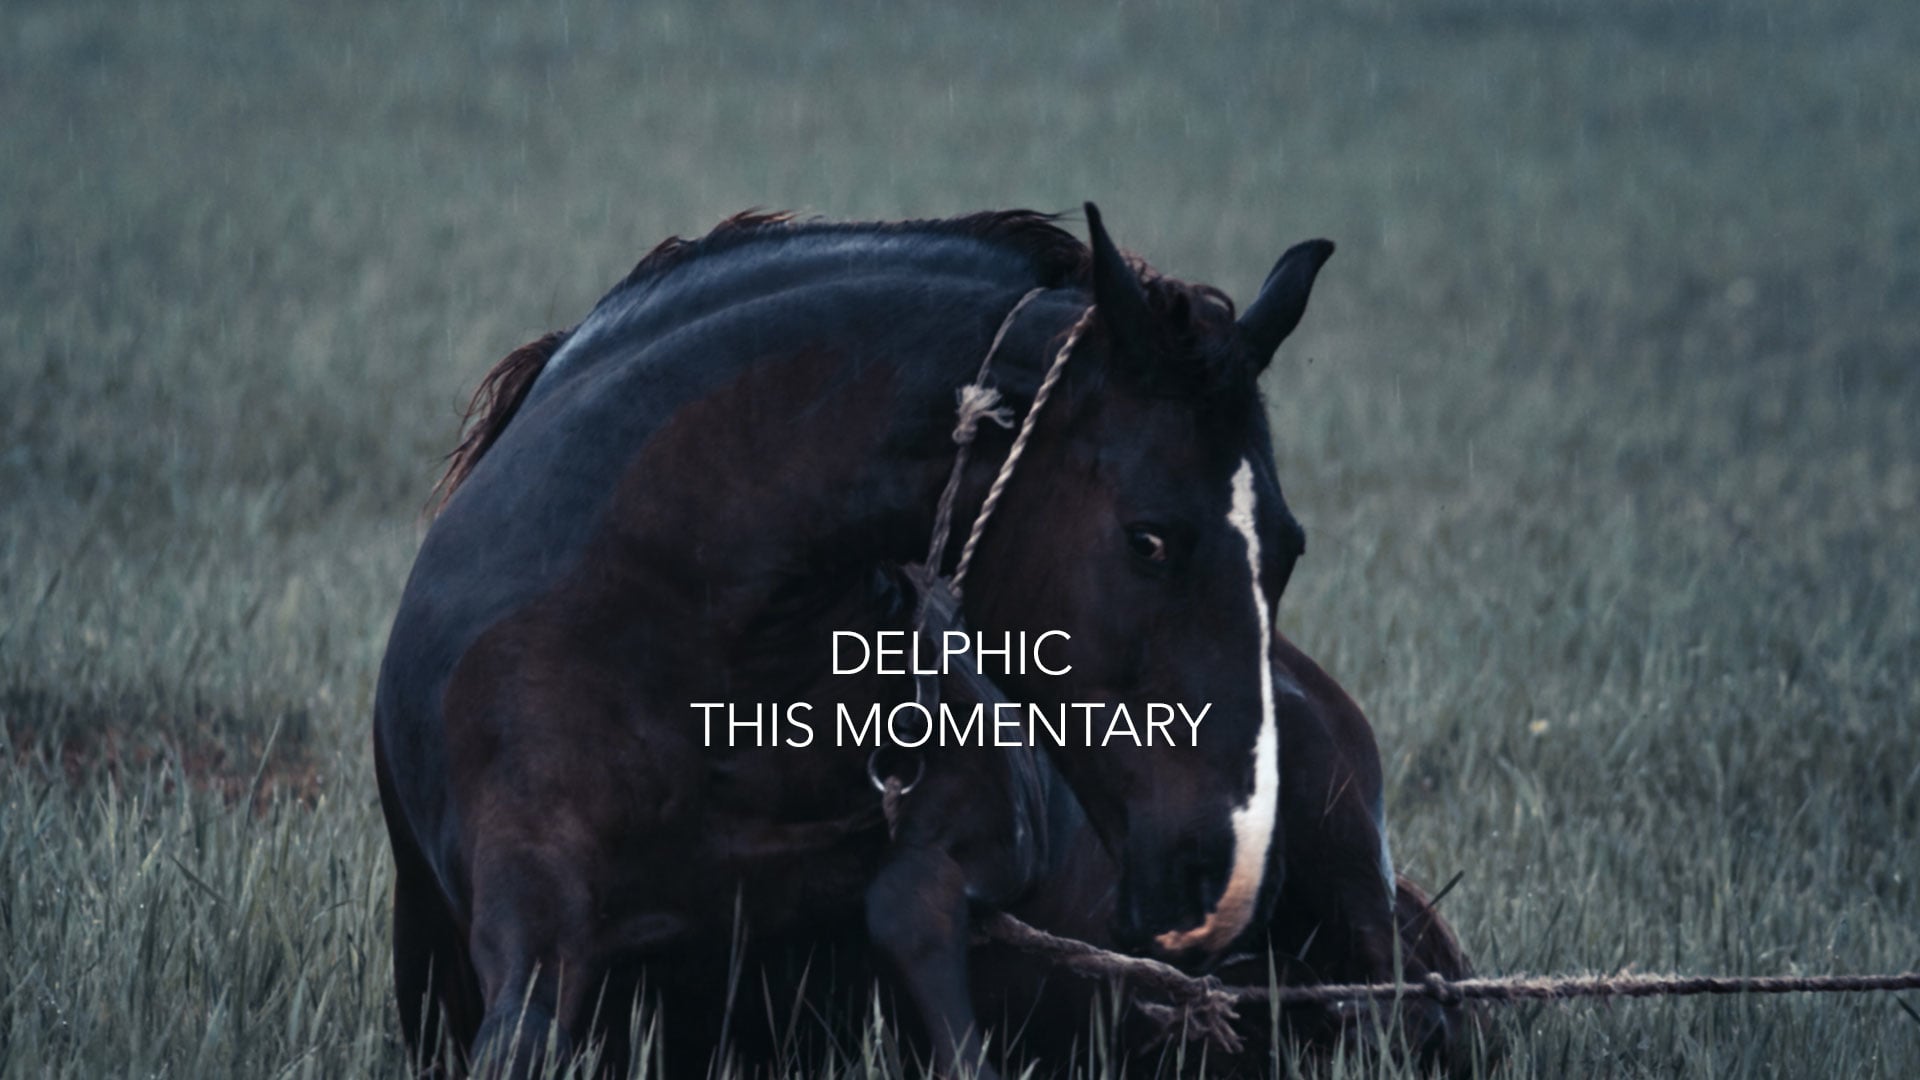 DELPHIC 'This Momentary'